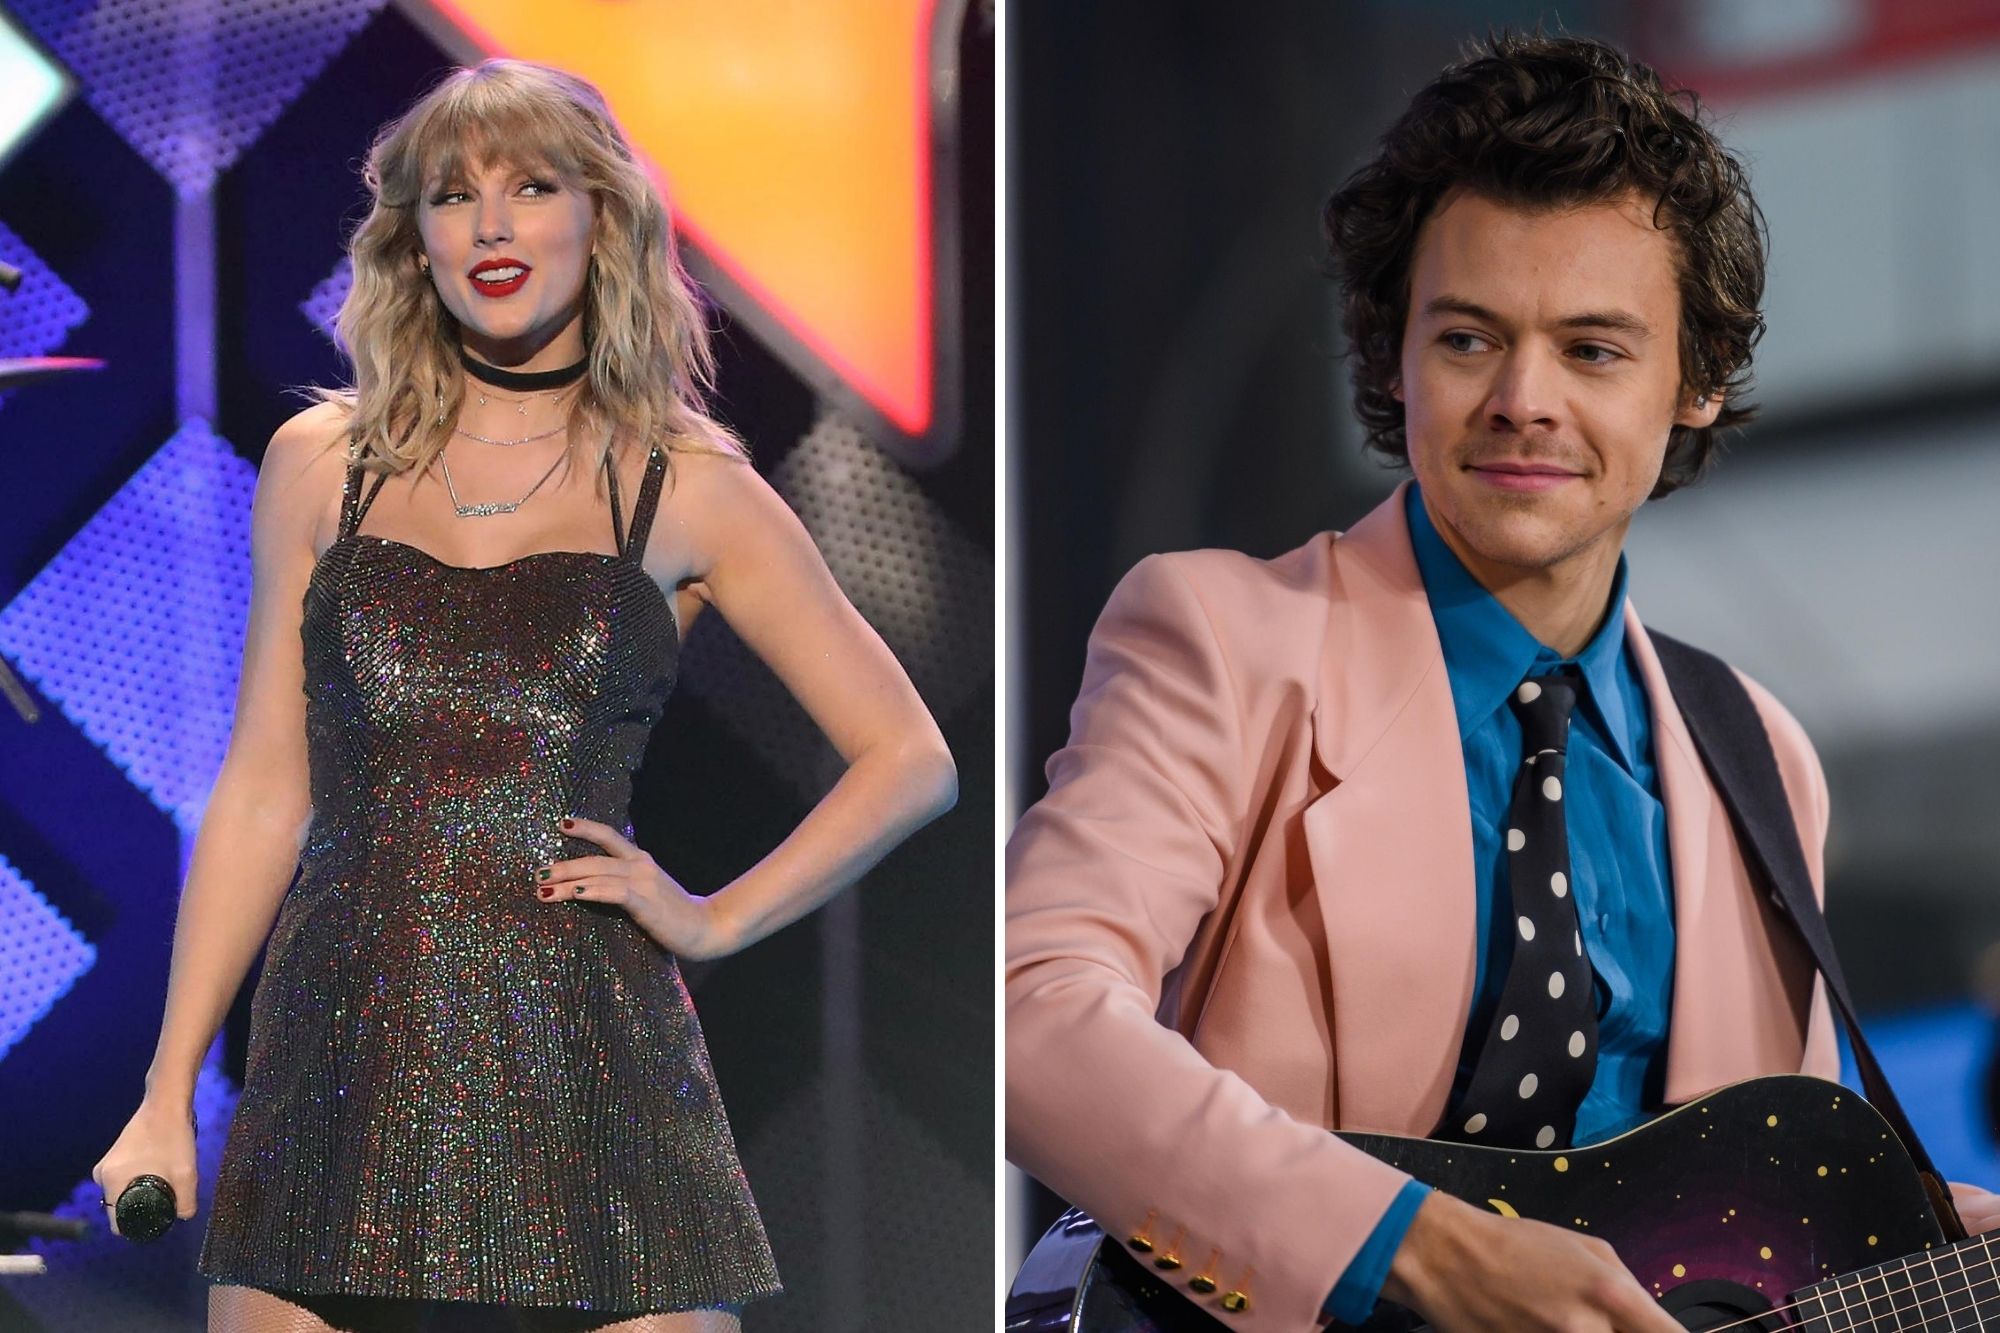 Taylor Swift onstage during the iHeartRadio's Z100 Jingle Ball 2019 at Madison Square Garden on Dec. 13, 2019 / Harry Styles on The TODAY Show Feb. 26, 2020.